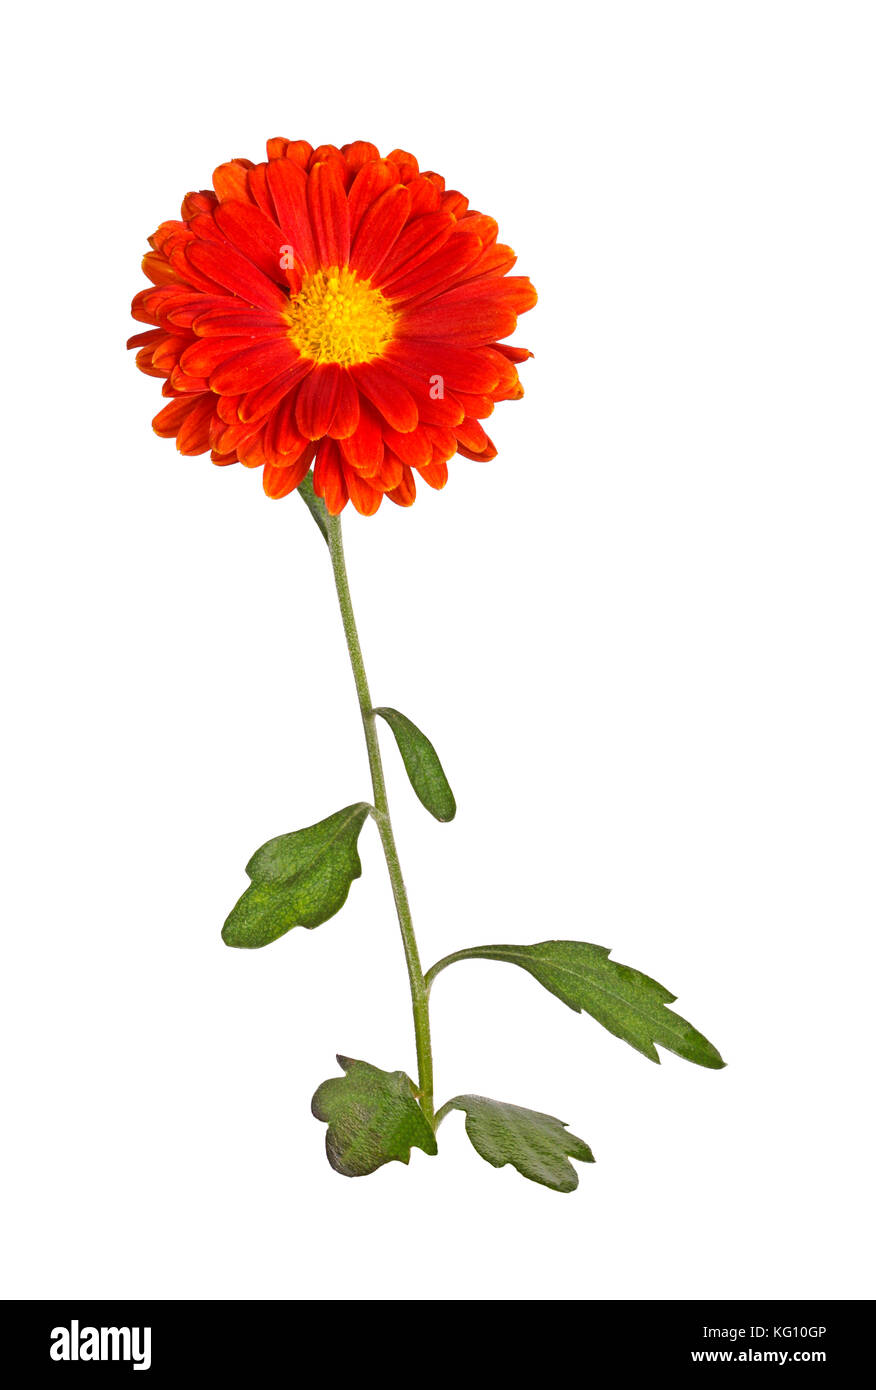 Single stem with leaves and an orange and yellow flower of the fall chrysanthemum (Chrysanthemum indicum) isolated against a white background Stock Photo